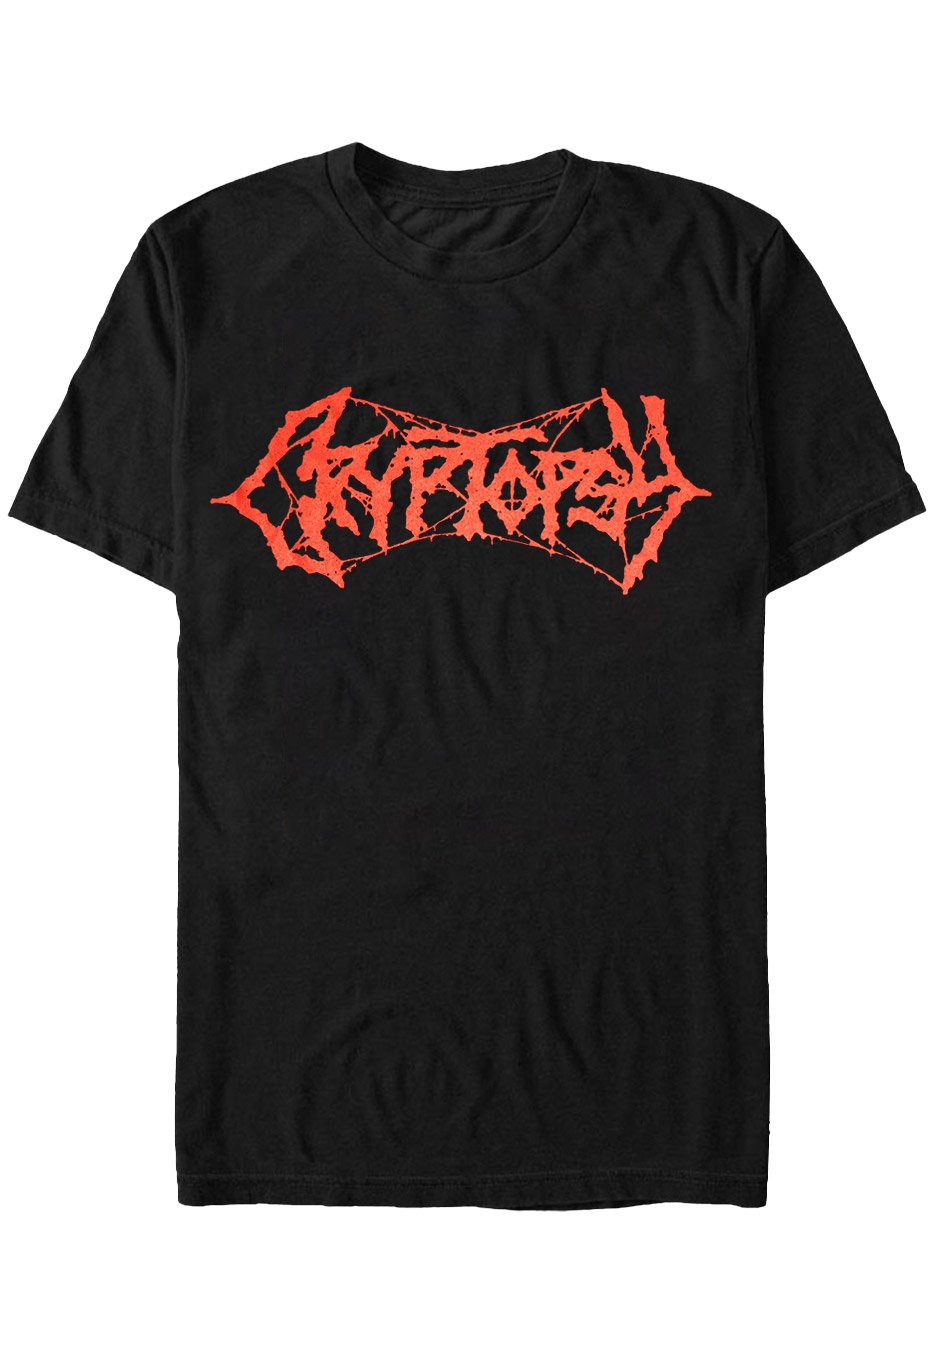 Cryptopsy - Crown Of Horns - T-Shirt